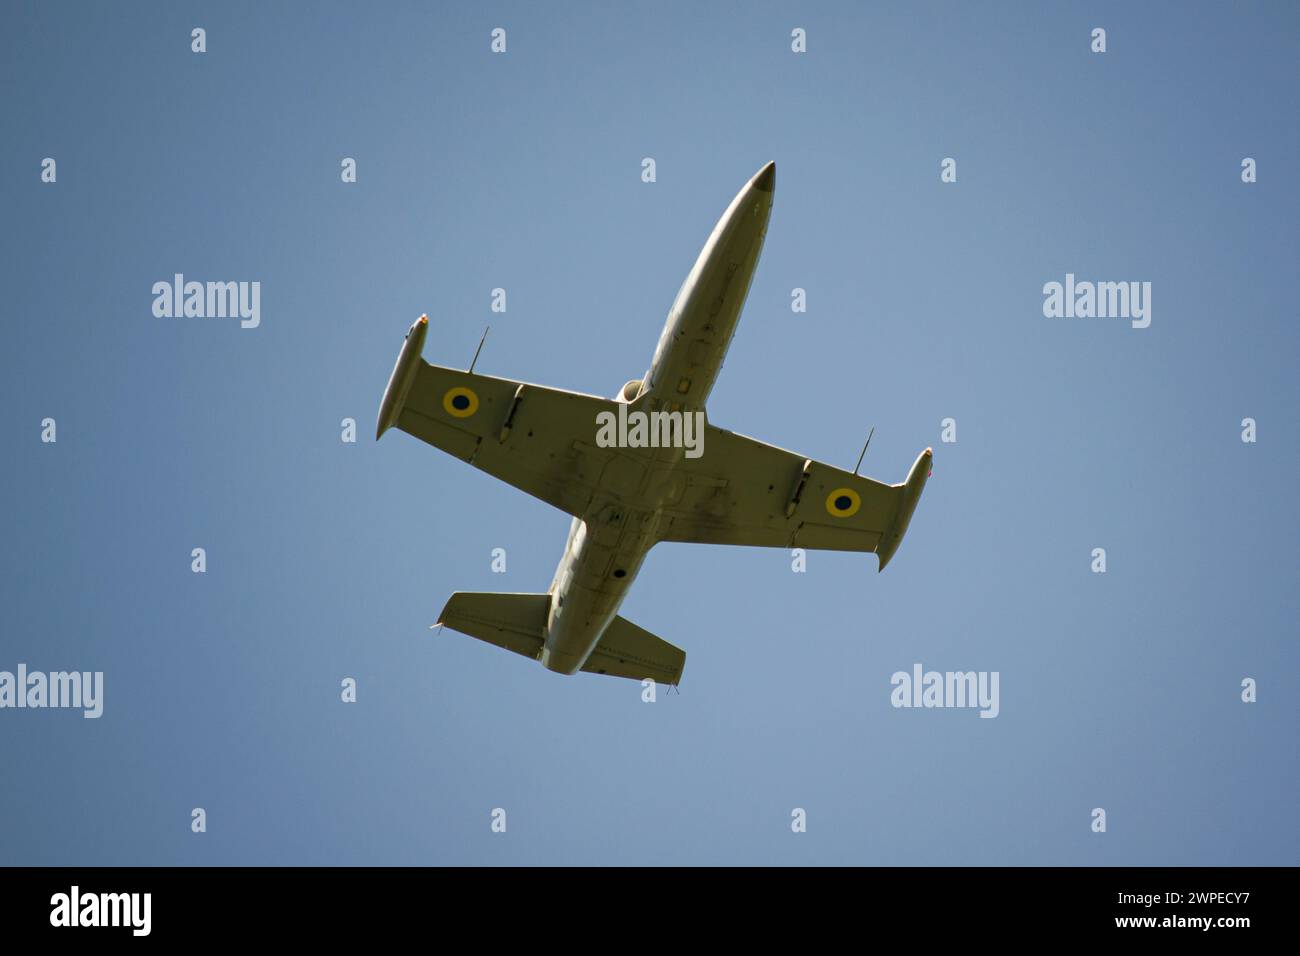 Ukrainian Armed Forces military training aircraft in-flight Stock Photo